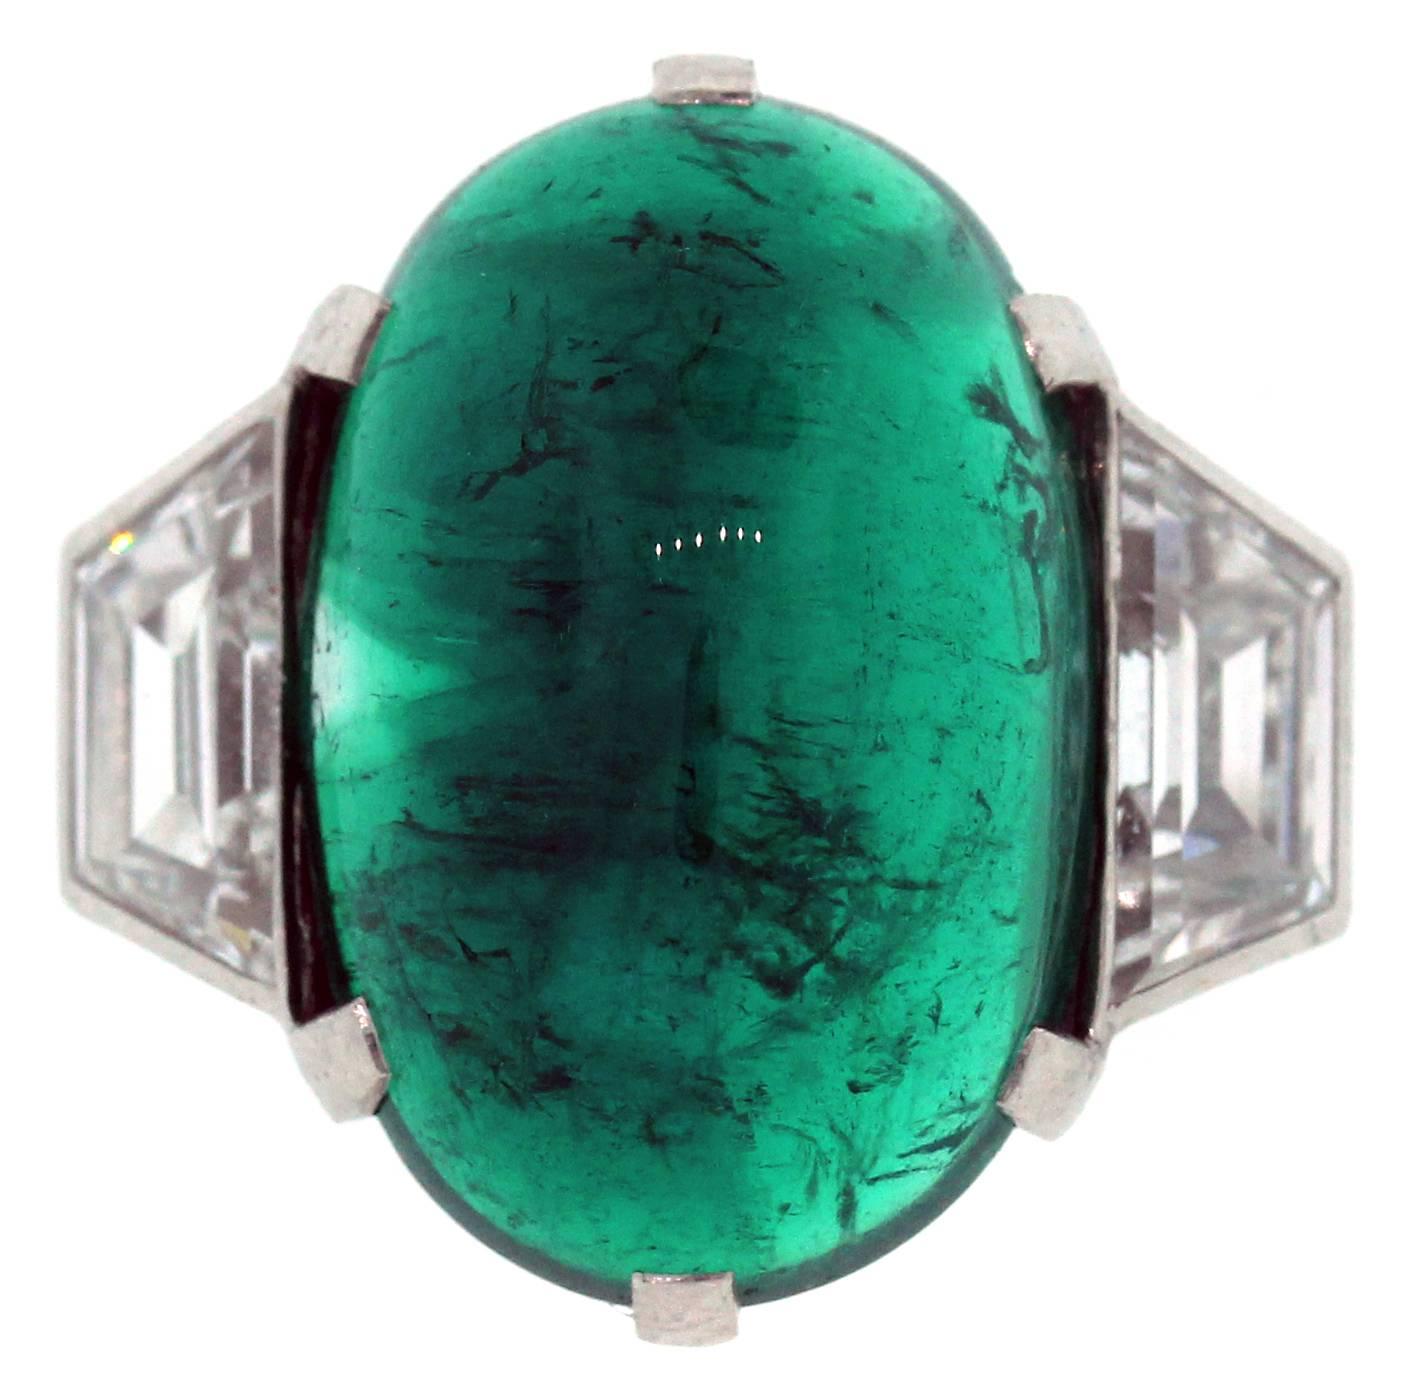 Colombian Emerald and Trapezoid Diamond Platinum Ring by Tiffany & Co. 

Center Emerald is a gorgeous Cabochon-cut, Oval, Colombian Emerald apprx. 15ct. AGL Certified (Certification in photos). 

Ring is done in Platinum and the trapezoid diamonds